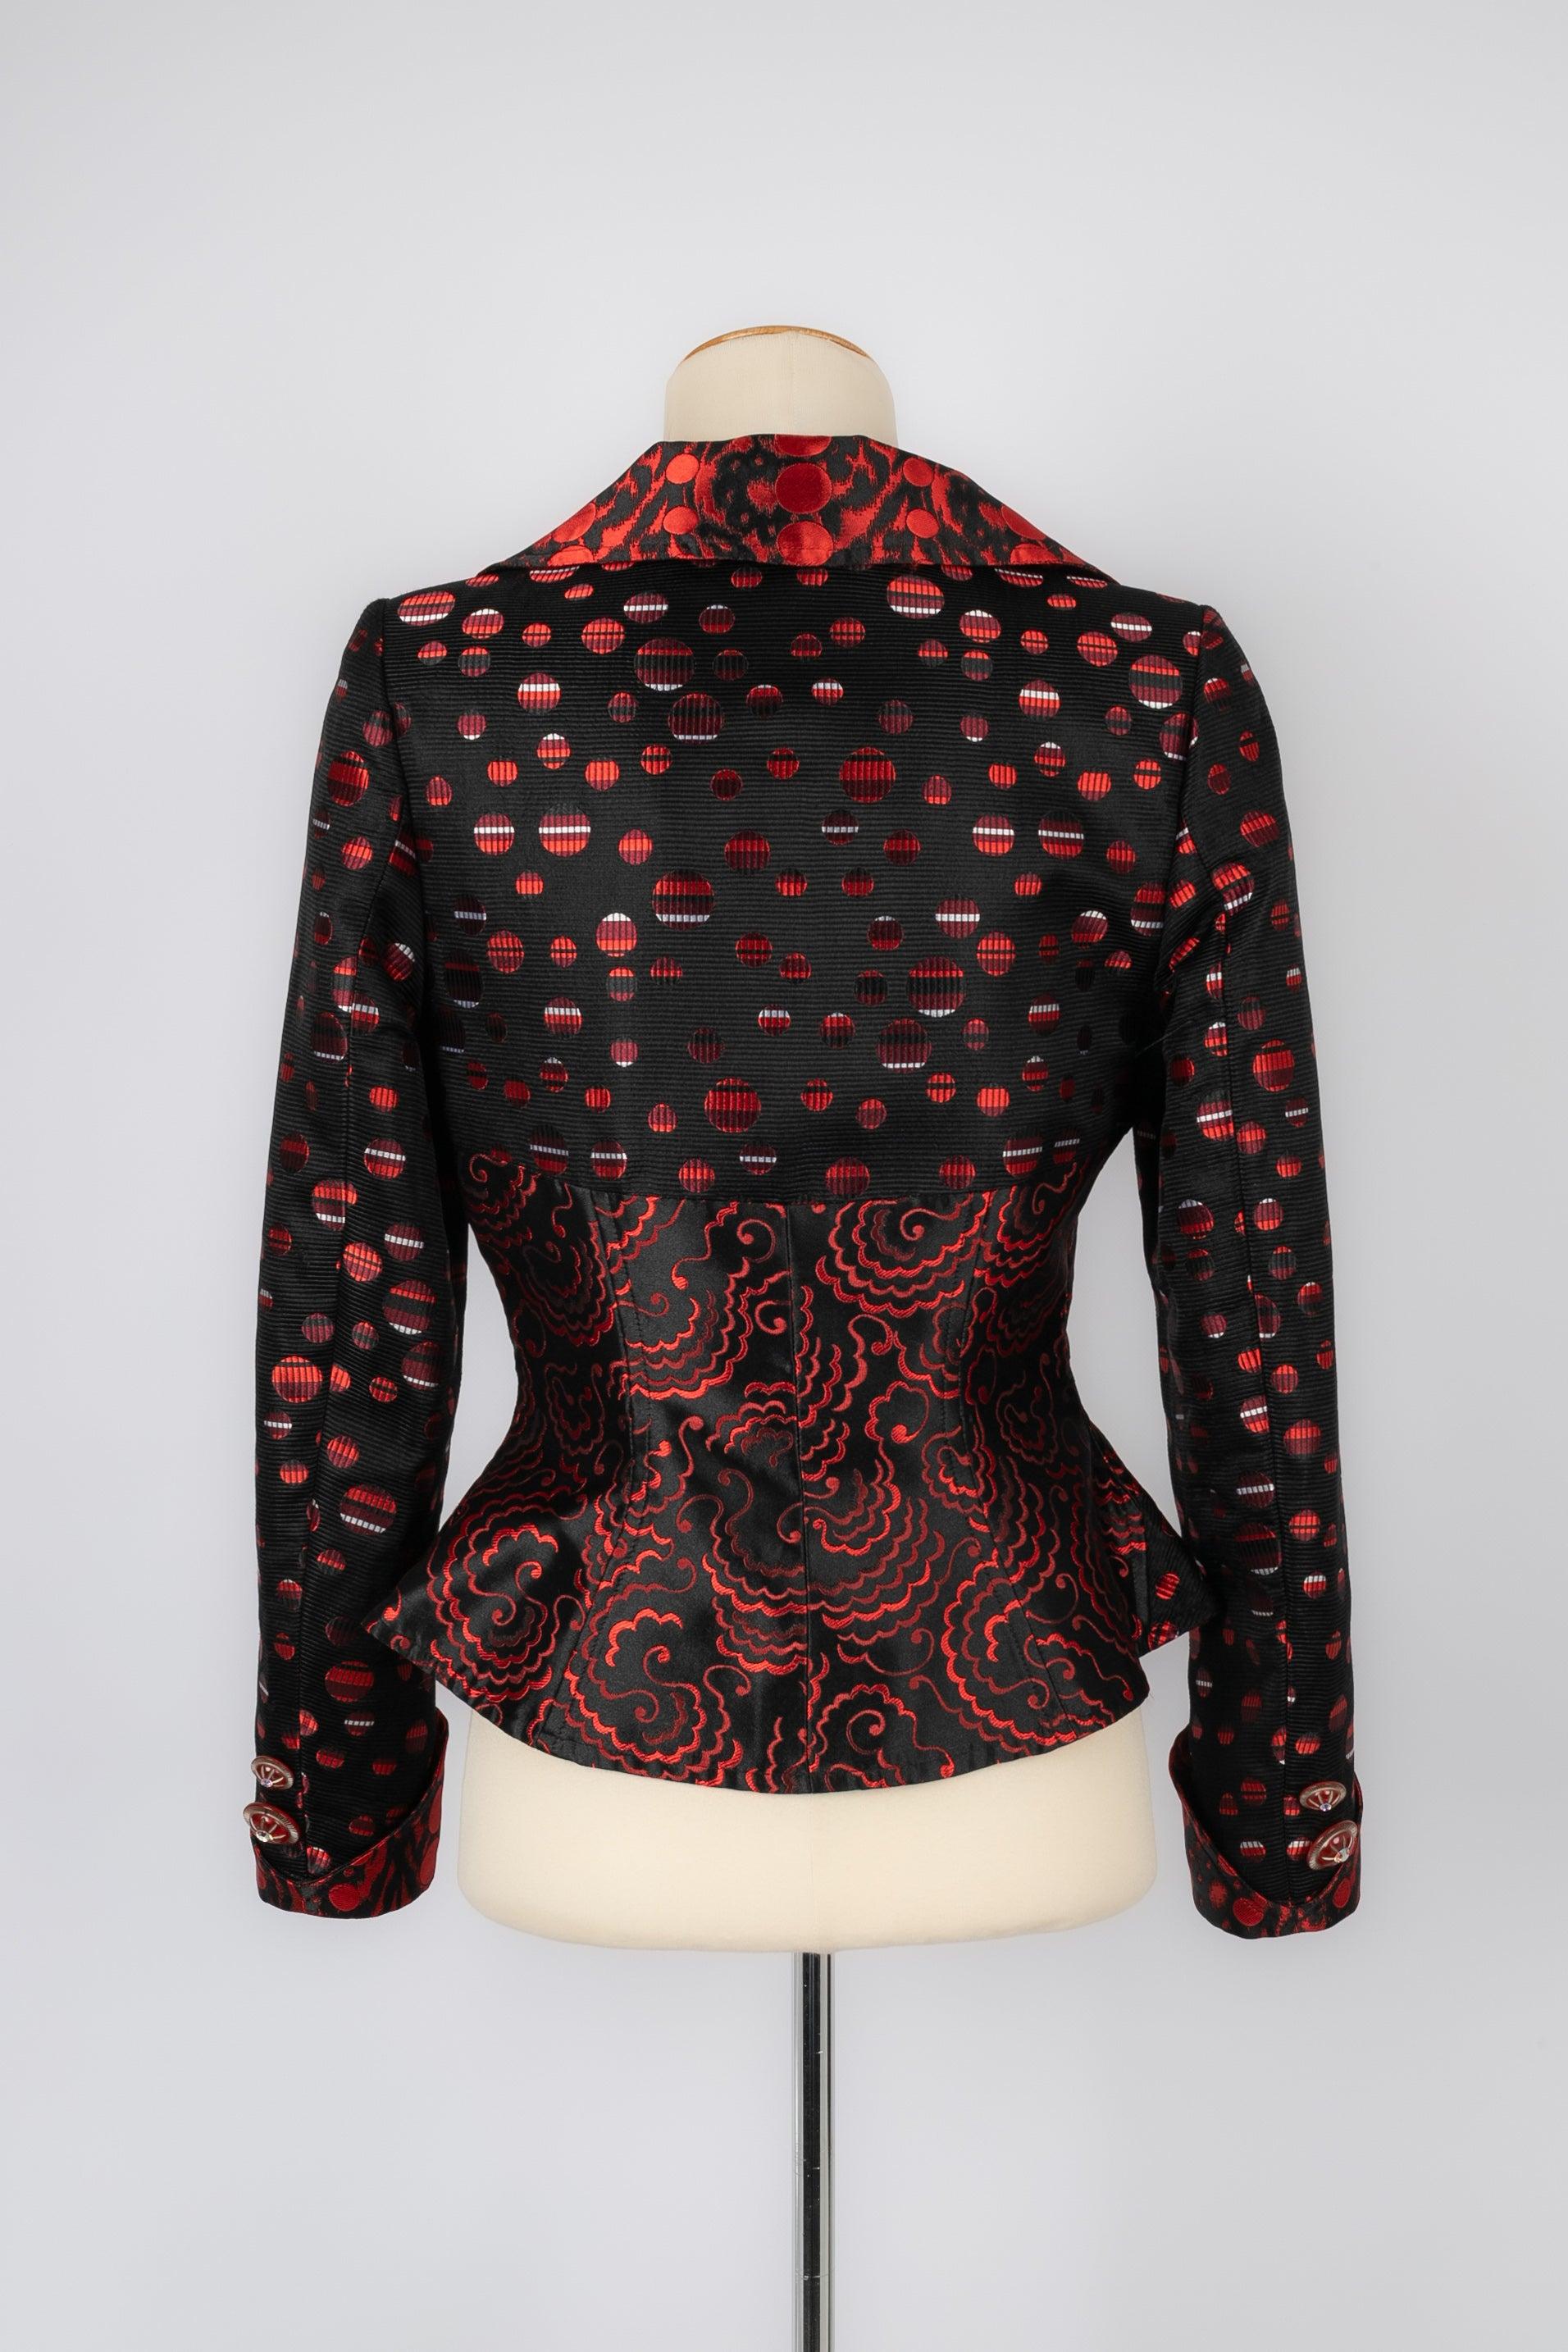 Christian Lacroix Silk Jacket in Black and Red Tones In Good Condition For Sale In SAINT-OUEN-SUR-SEINE, FR